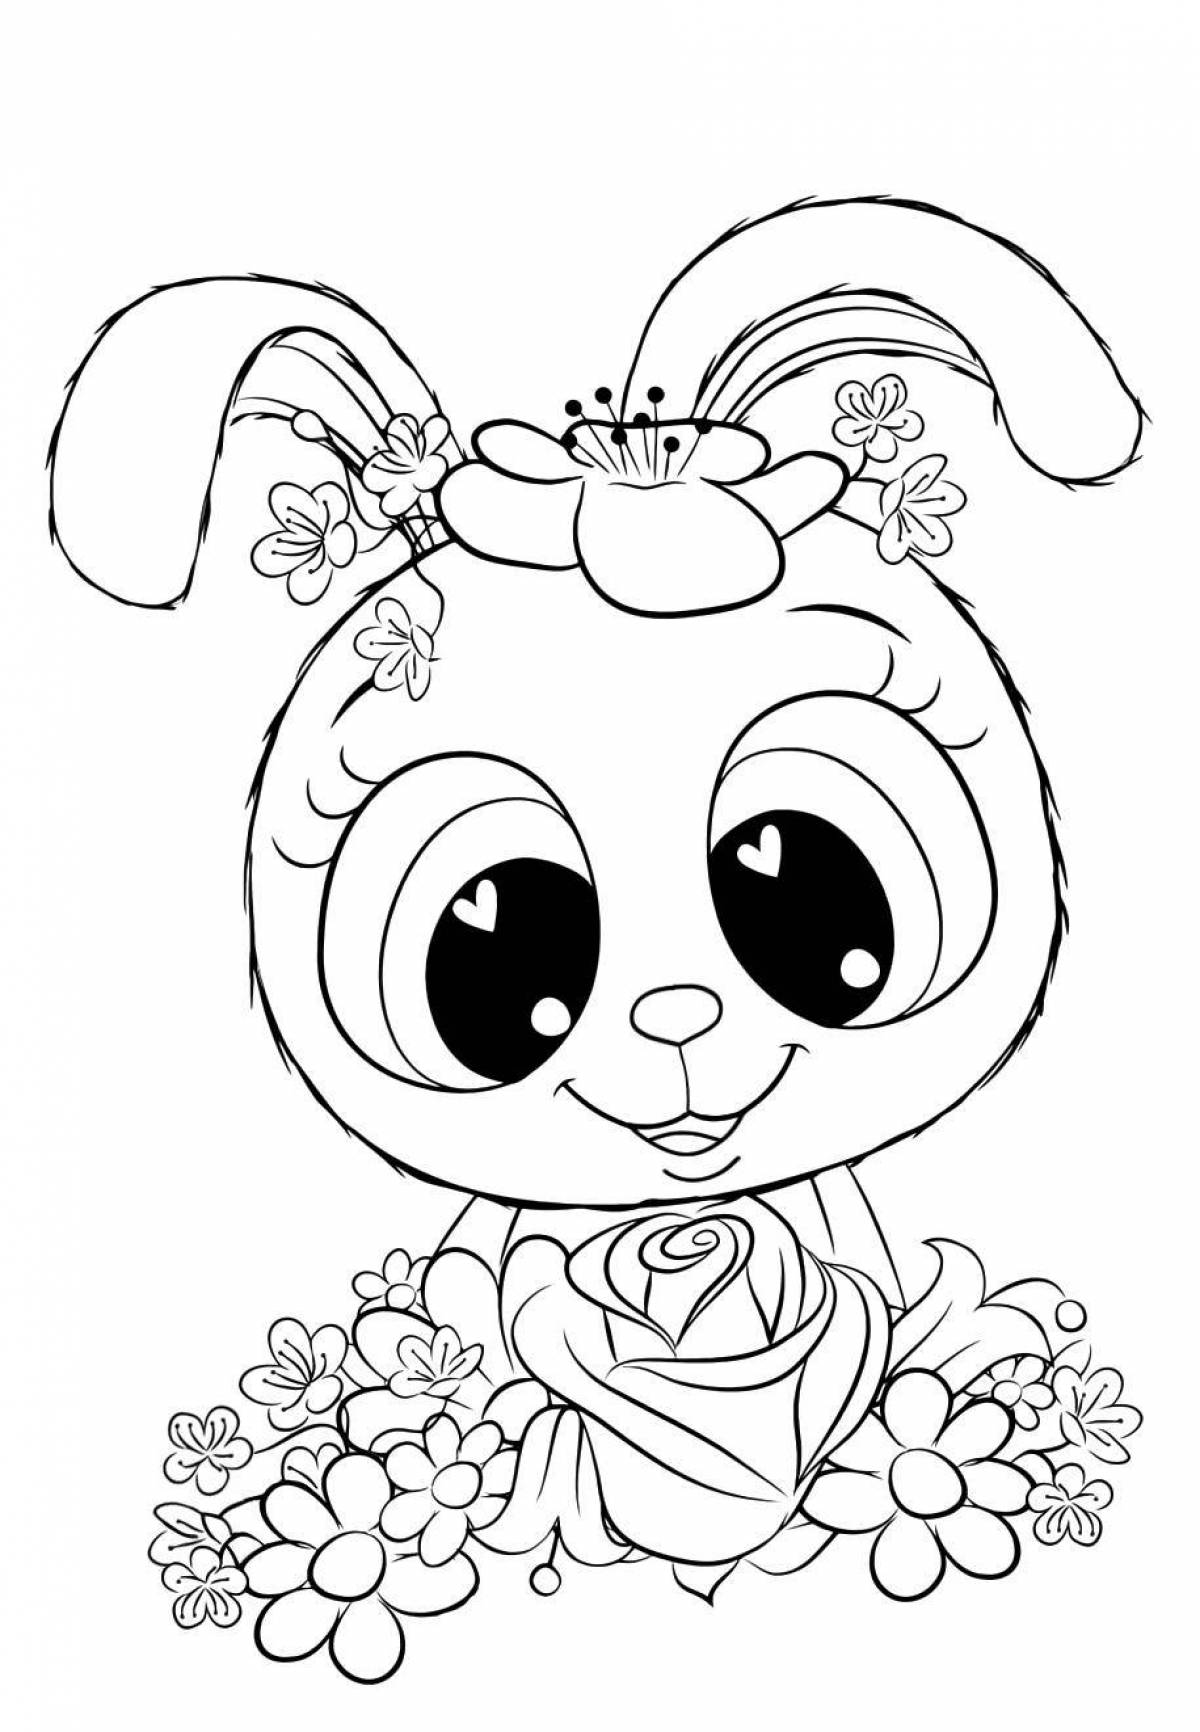 Perfect coloring book for girls cute animals